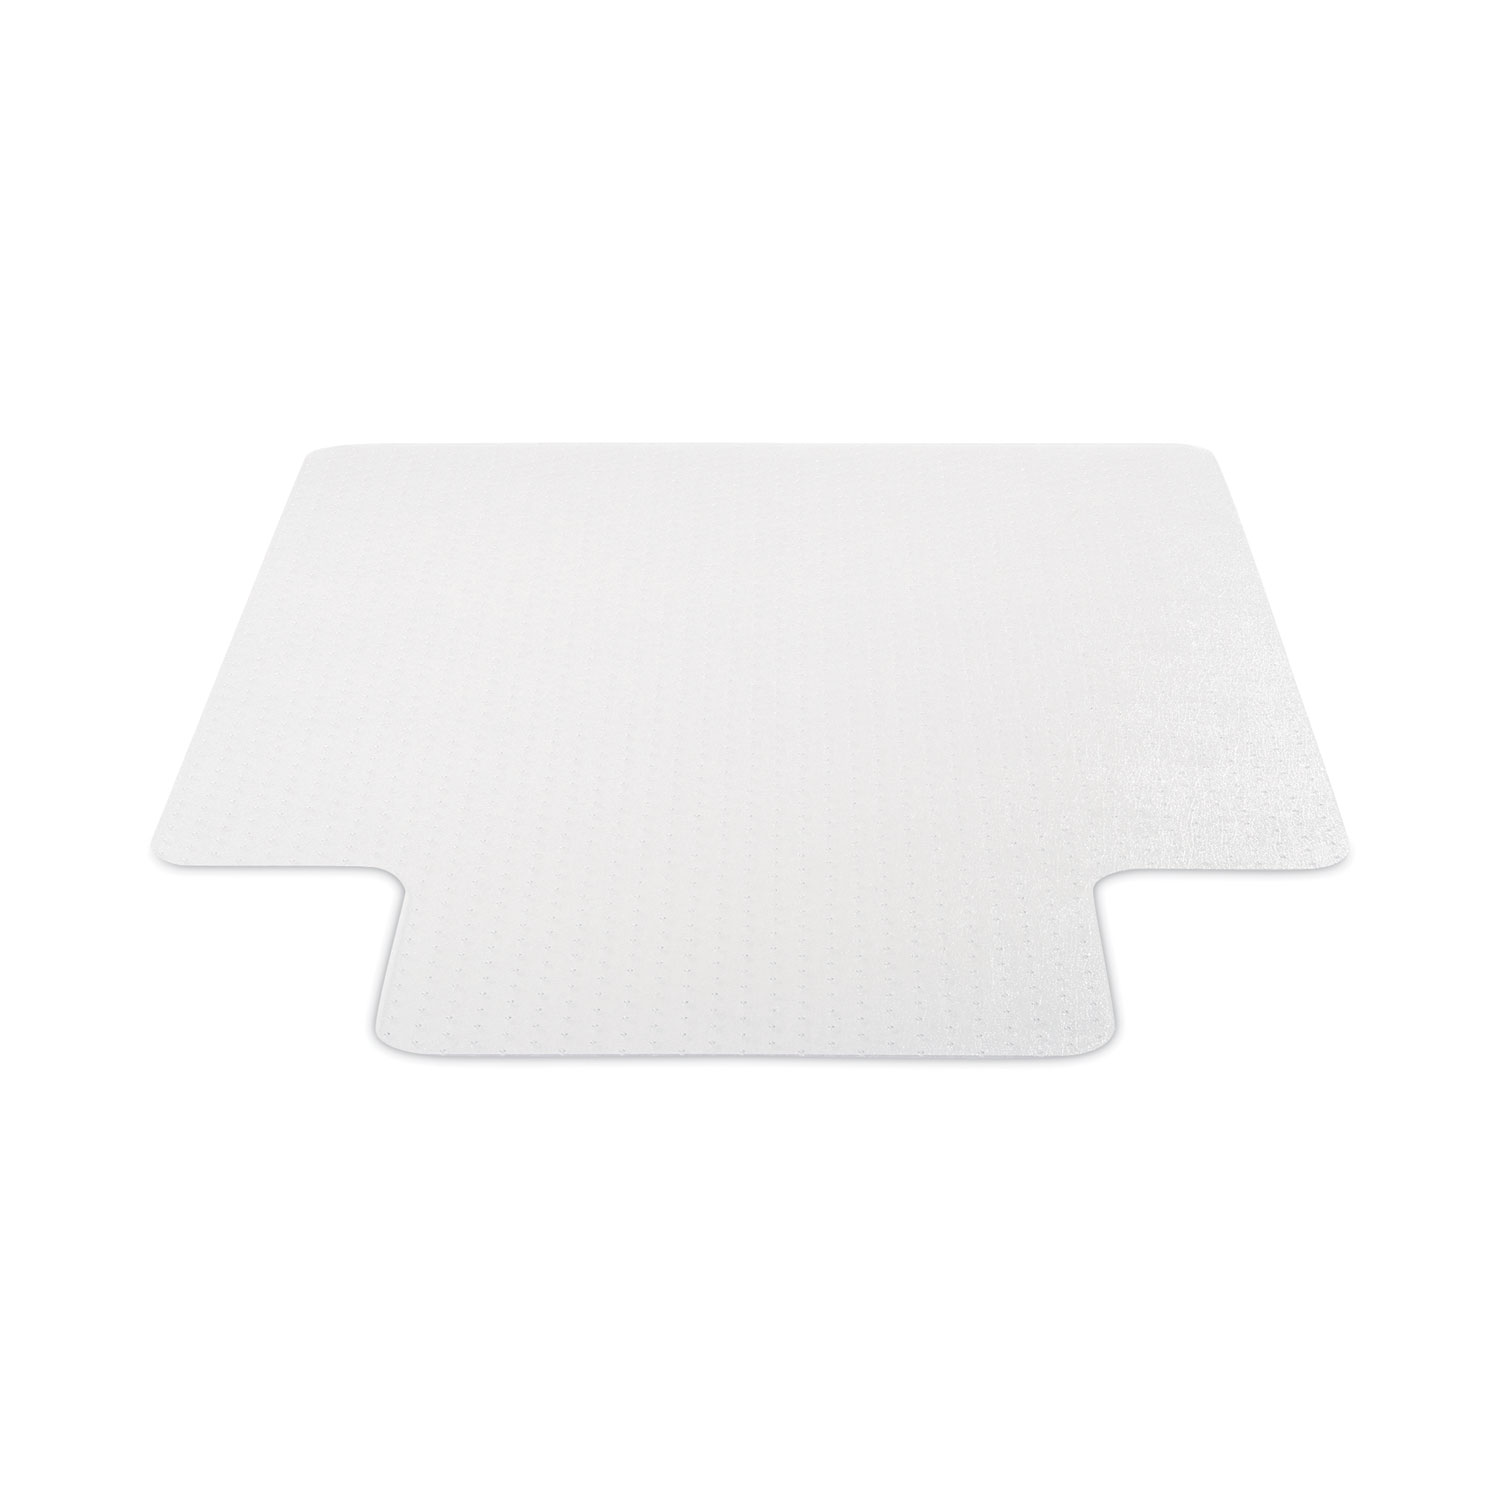 Deflecto CM14432F Supermat Frequent Use Chair Mat for Medium Pile Carpet 46 X for sale online 